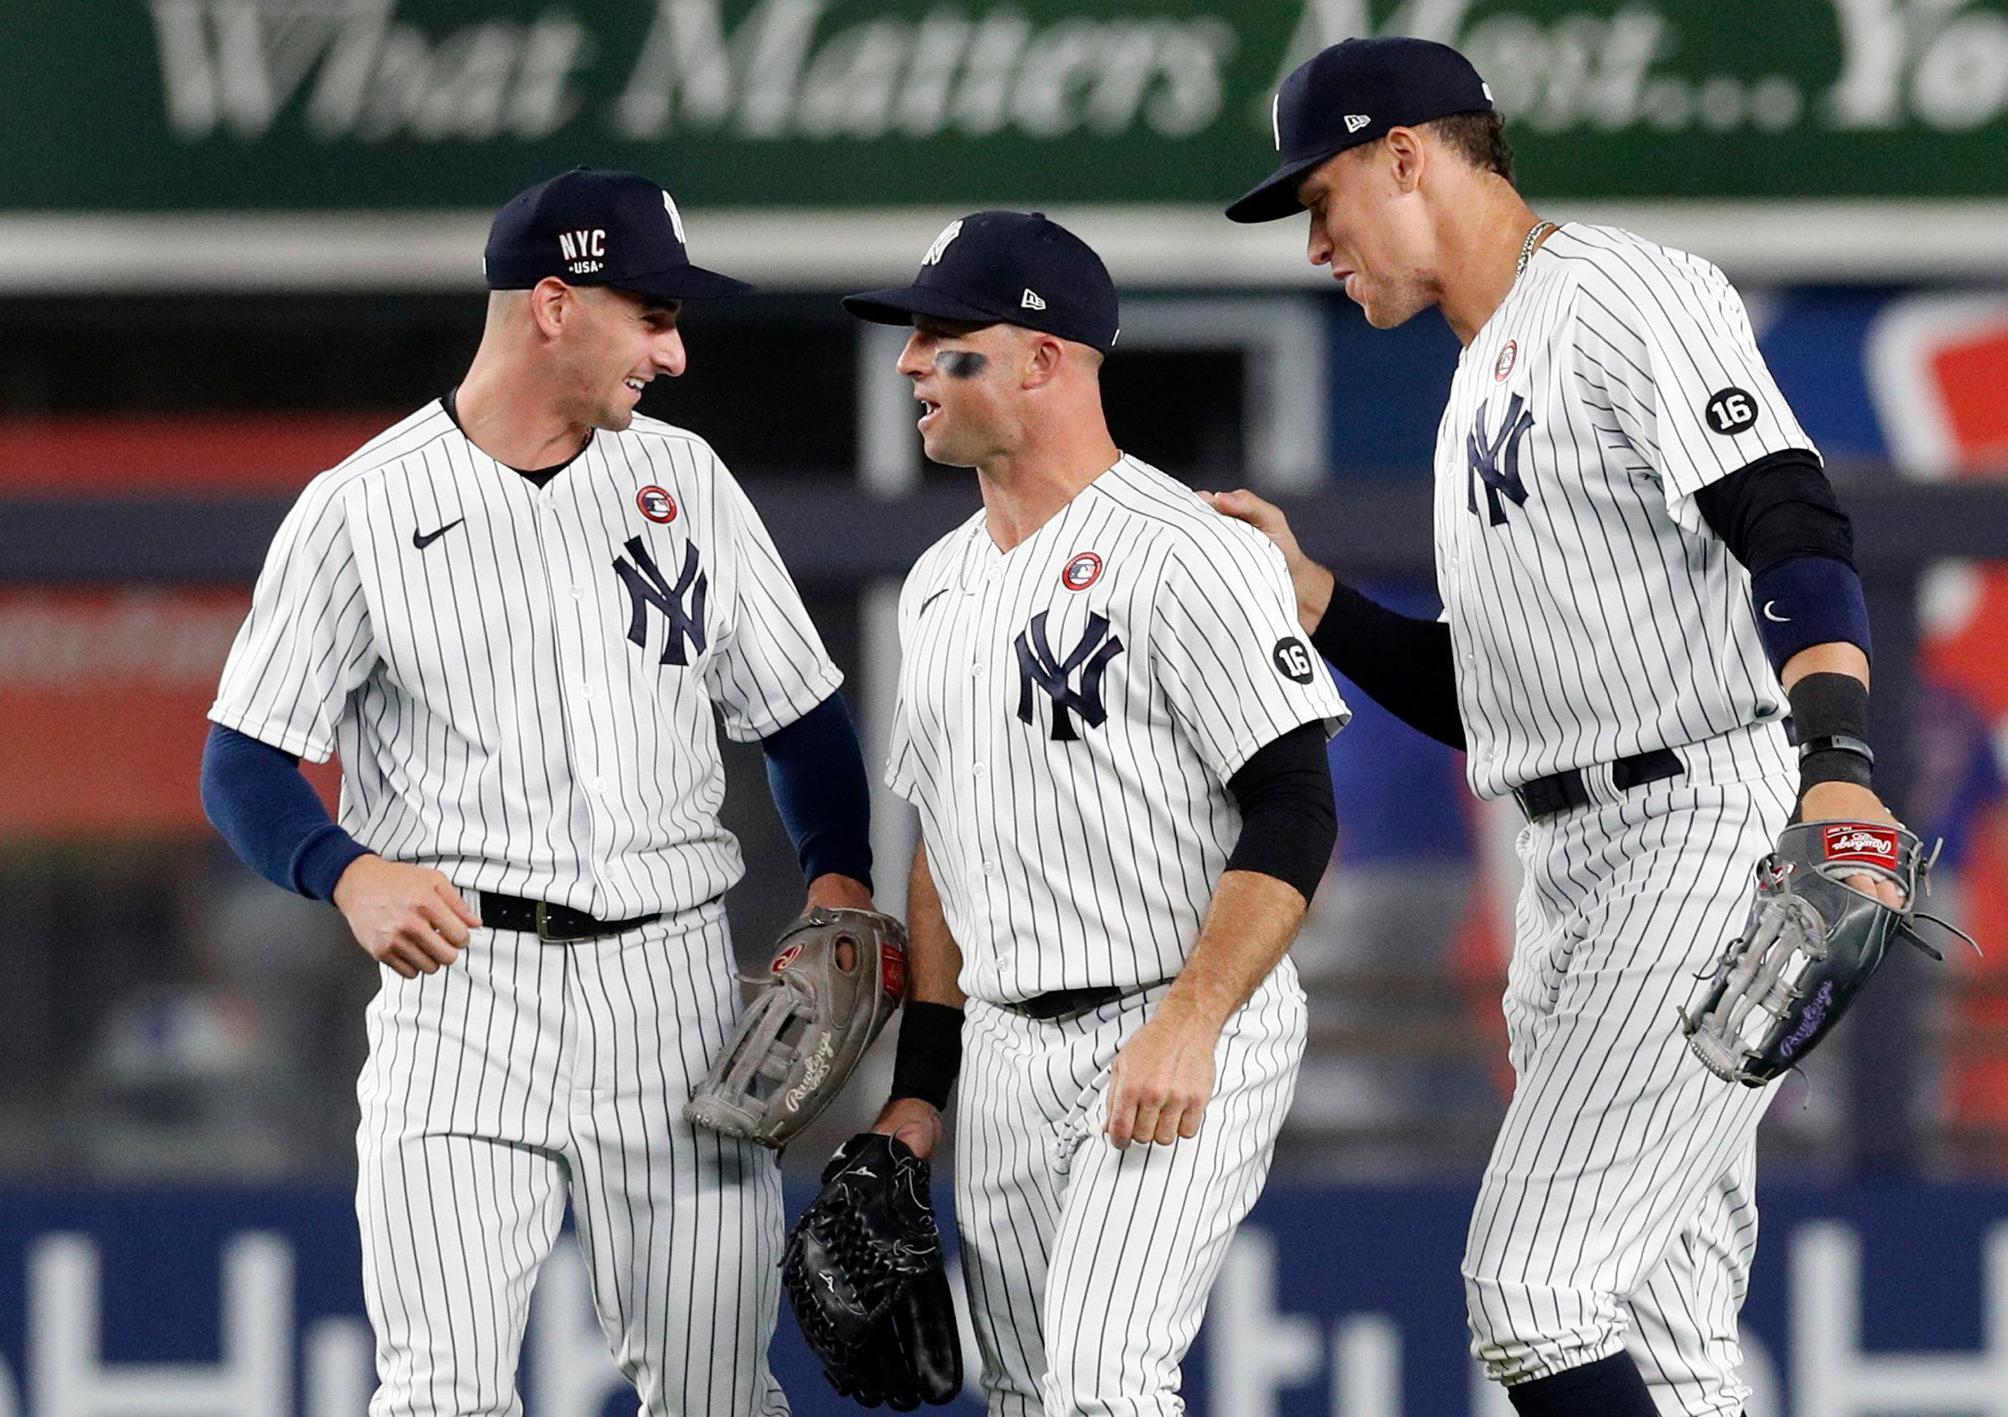 The Yankees and Mets Renew their Rivalry in the Subway Series